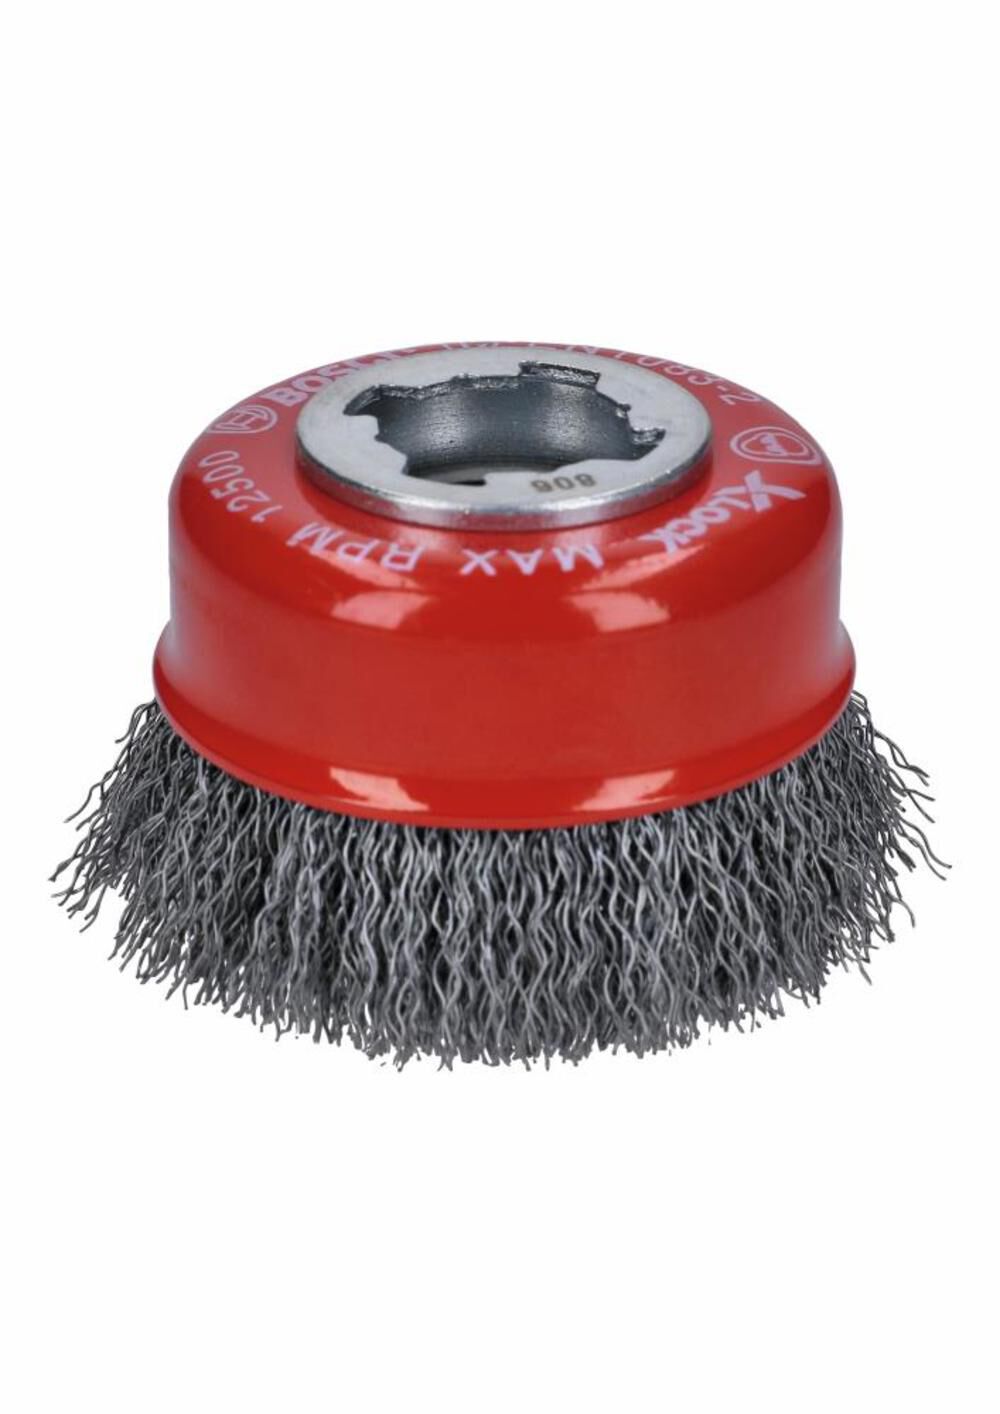 BOSCH 3" Wheel Dia. X-LOCK Arbor Carbon Steel Crimped Wire Cup Brush (5 PACK)